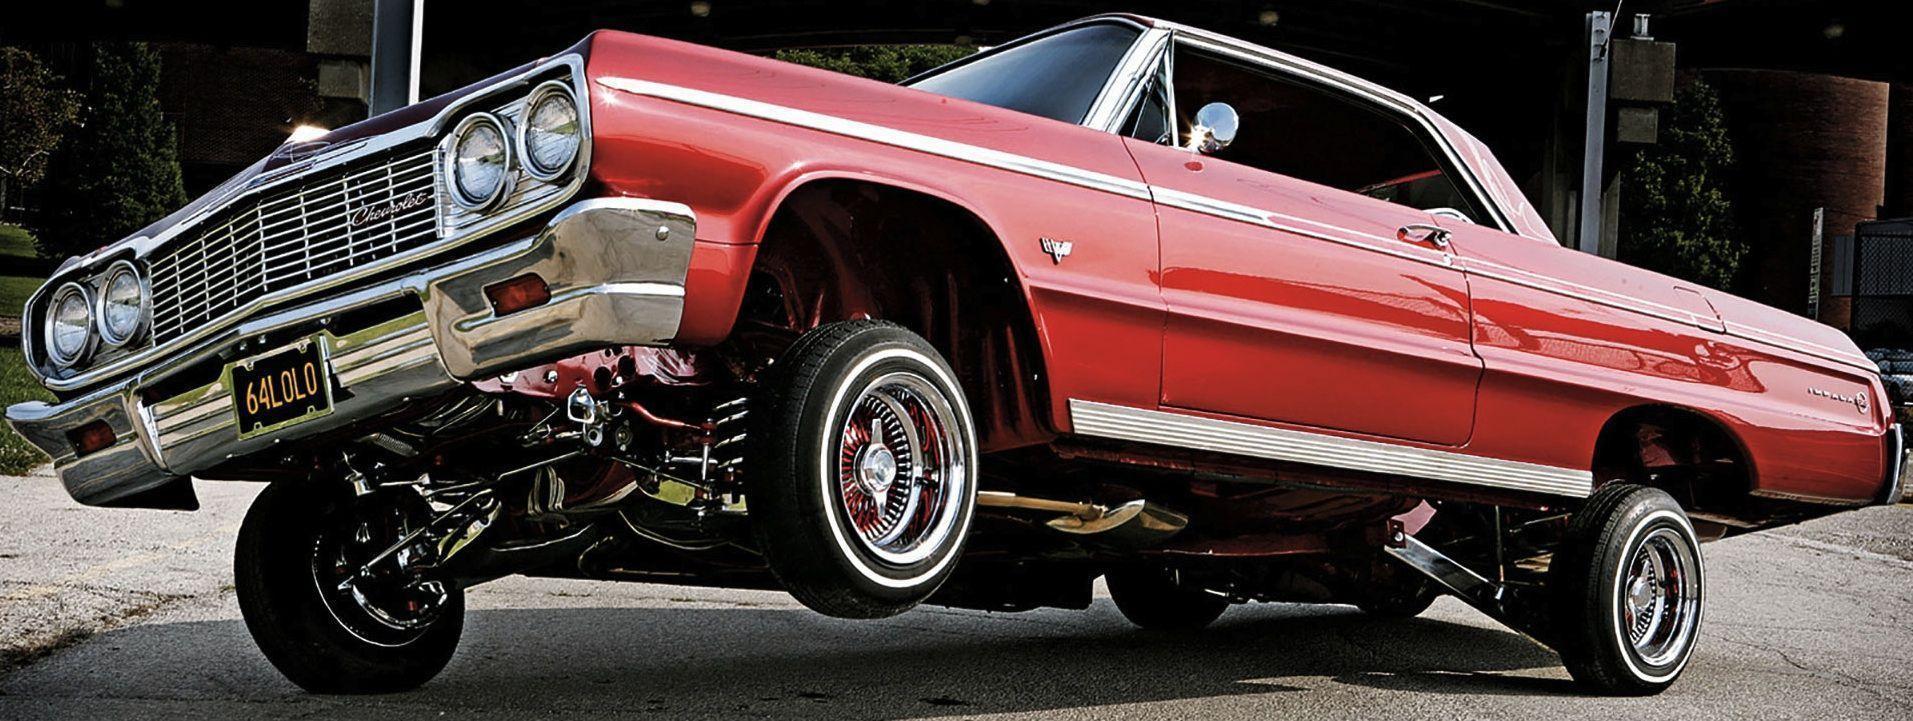 Animals For > 1964 Chevy Impala Lowrider Wallpaper